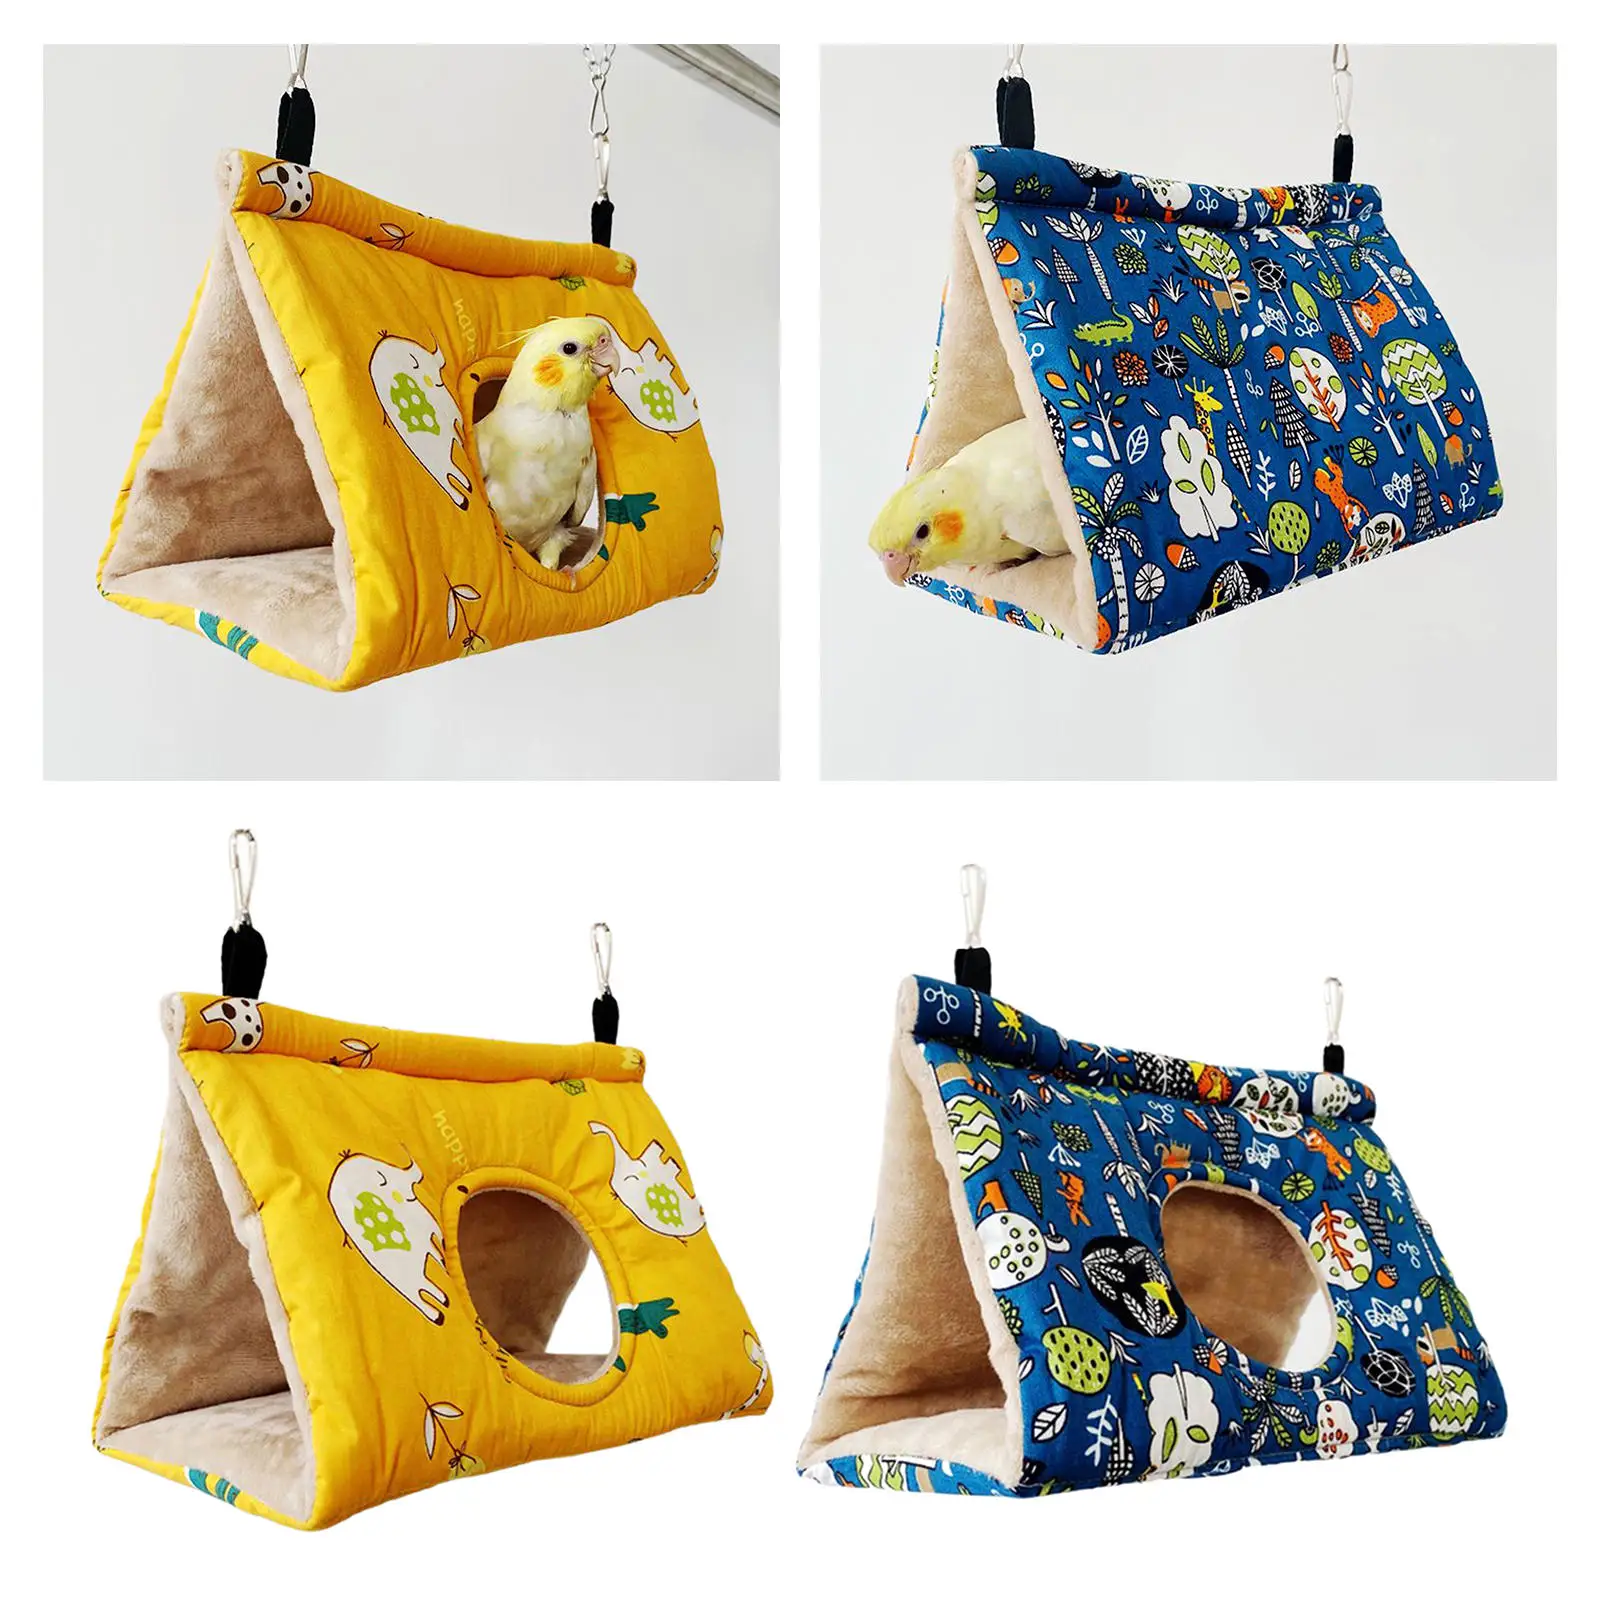 Winter Warm Bird Nest House ing Hammock Bed Toy for Pet Parrot